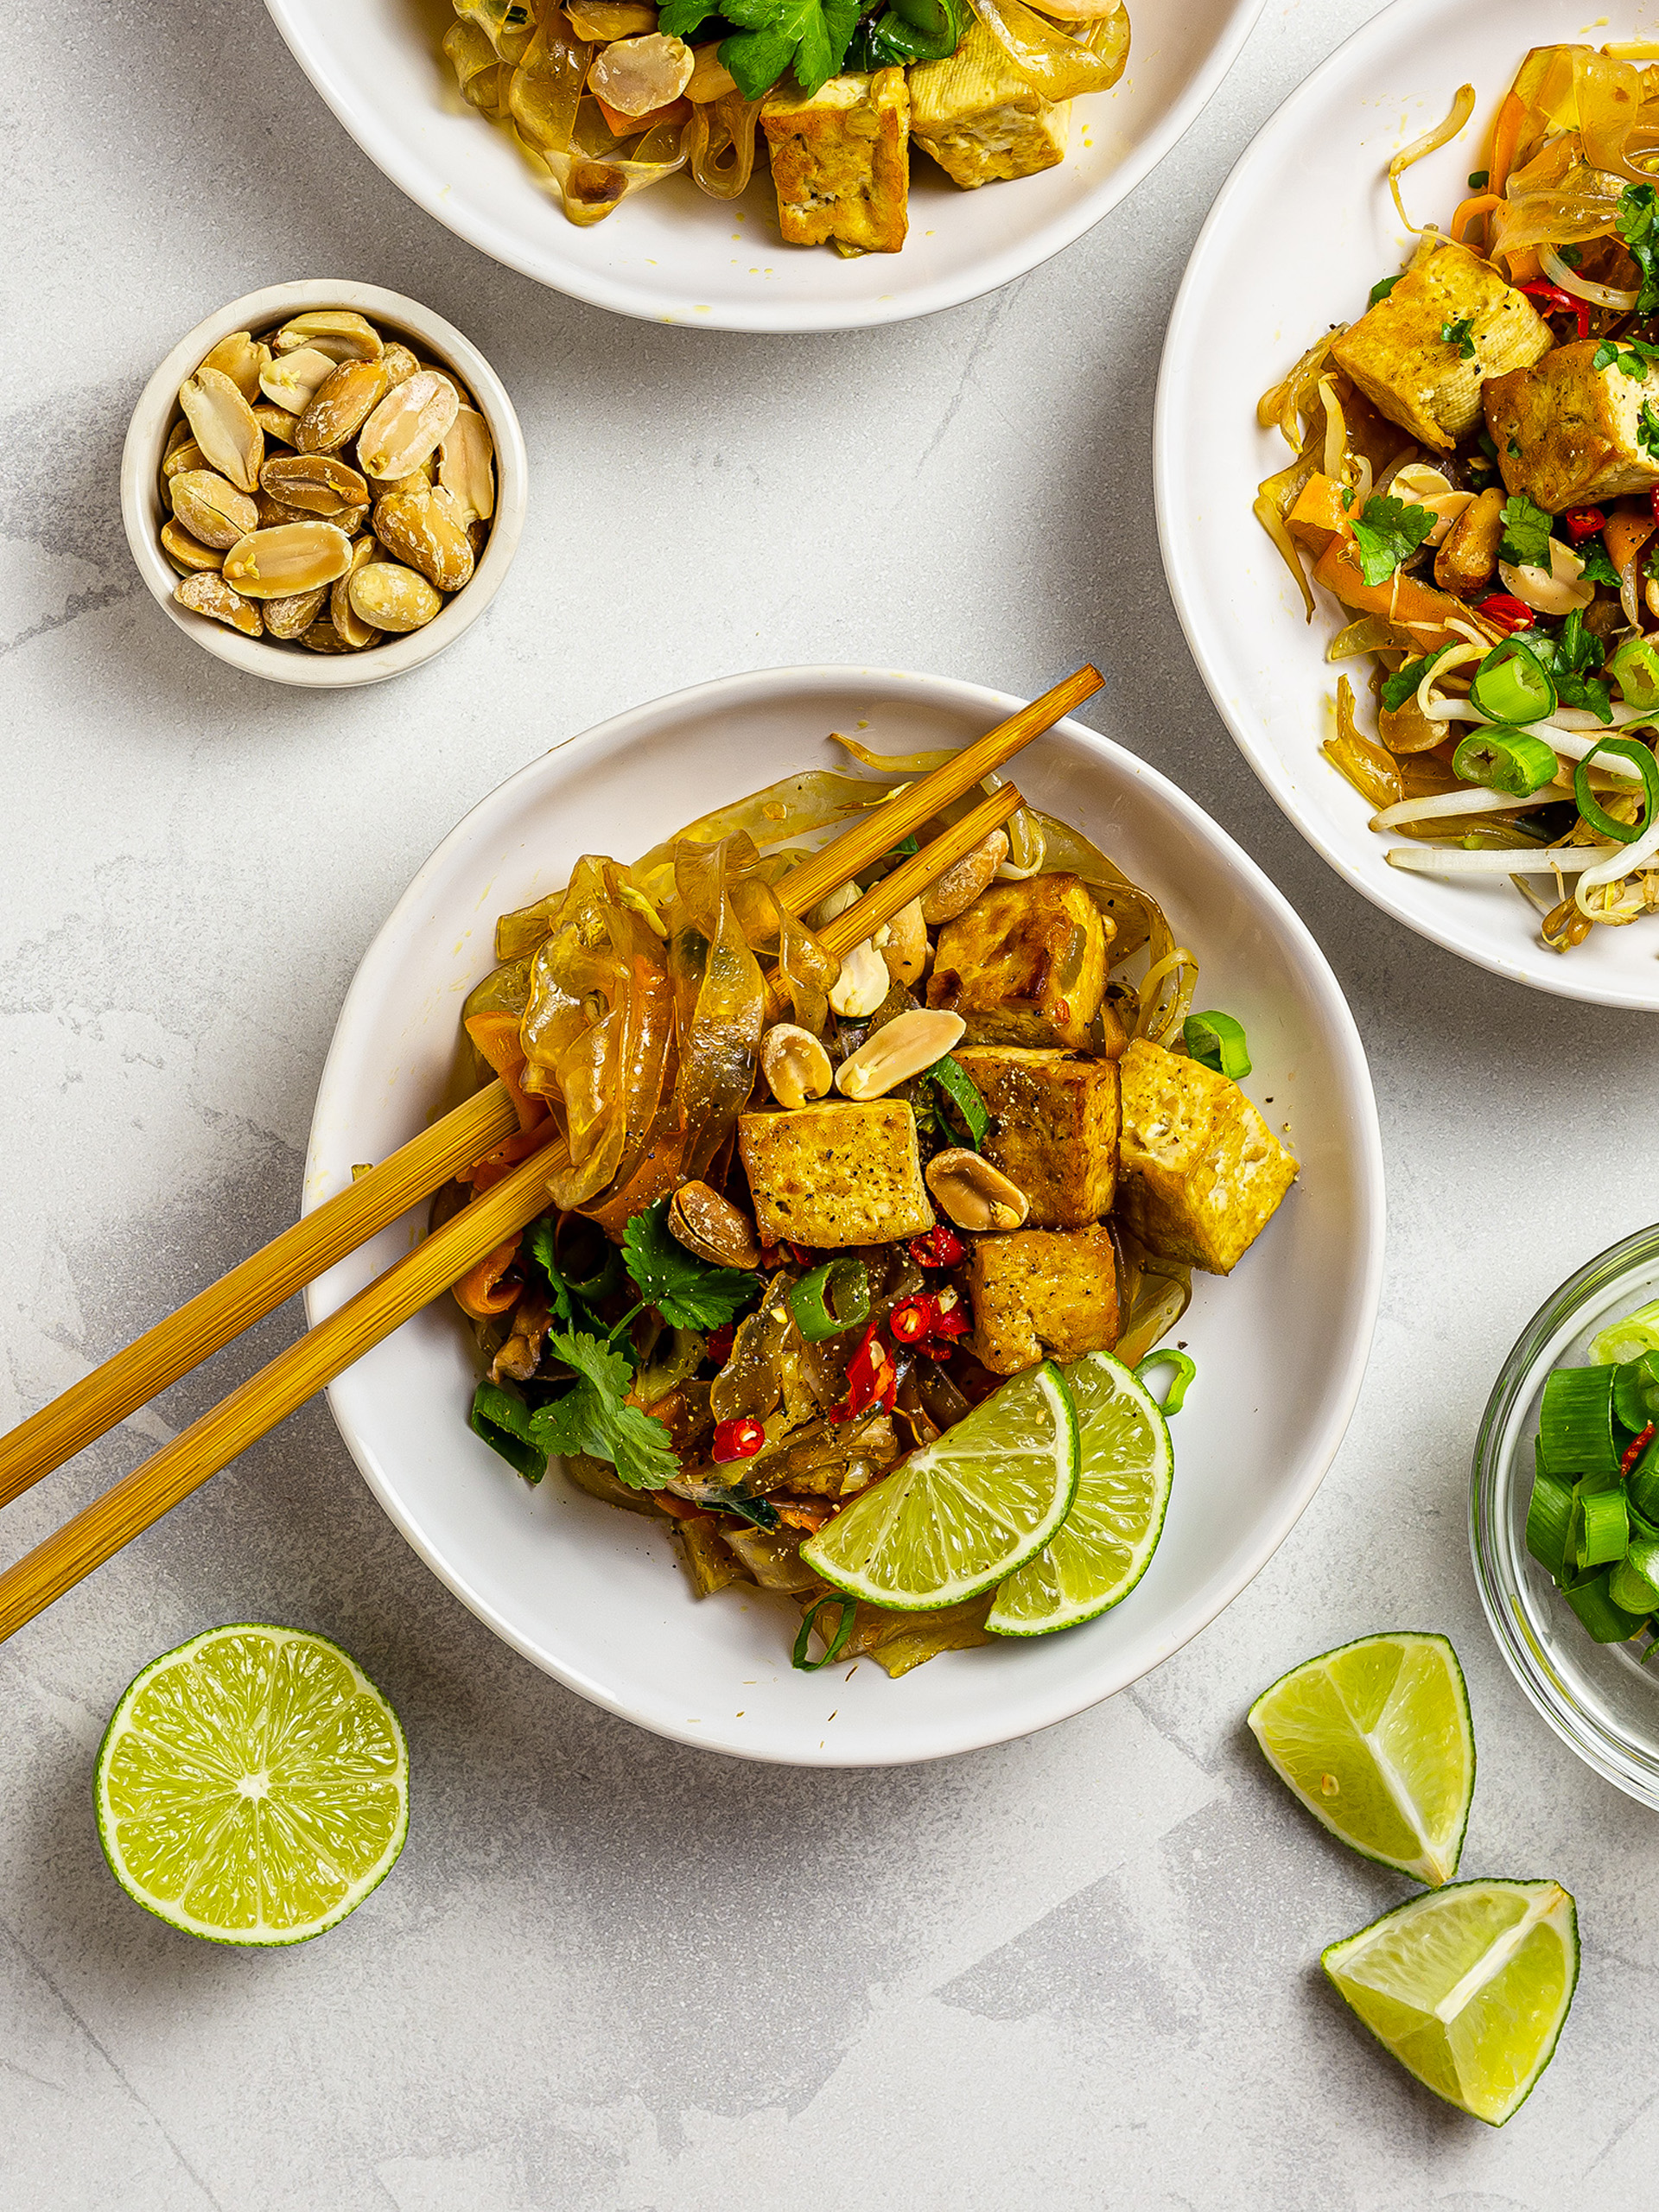 10 Healthy Vegan Dinners Ready in 30 Minutes